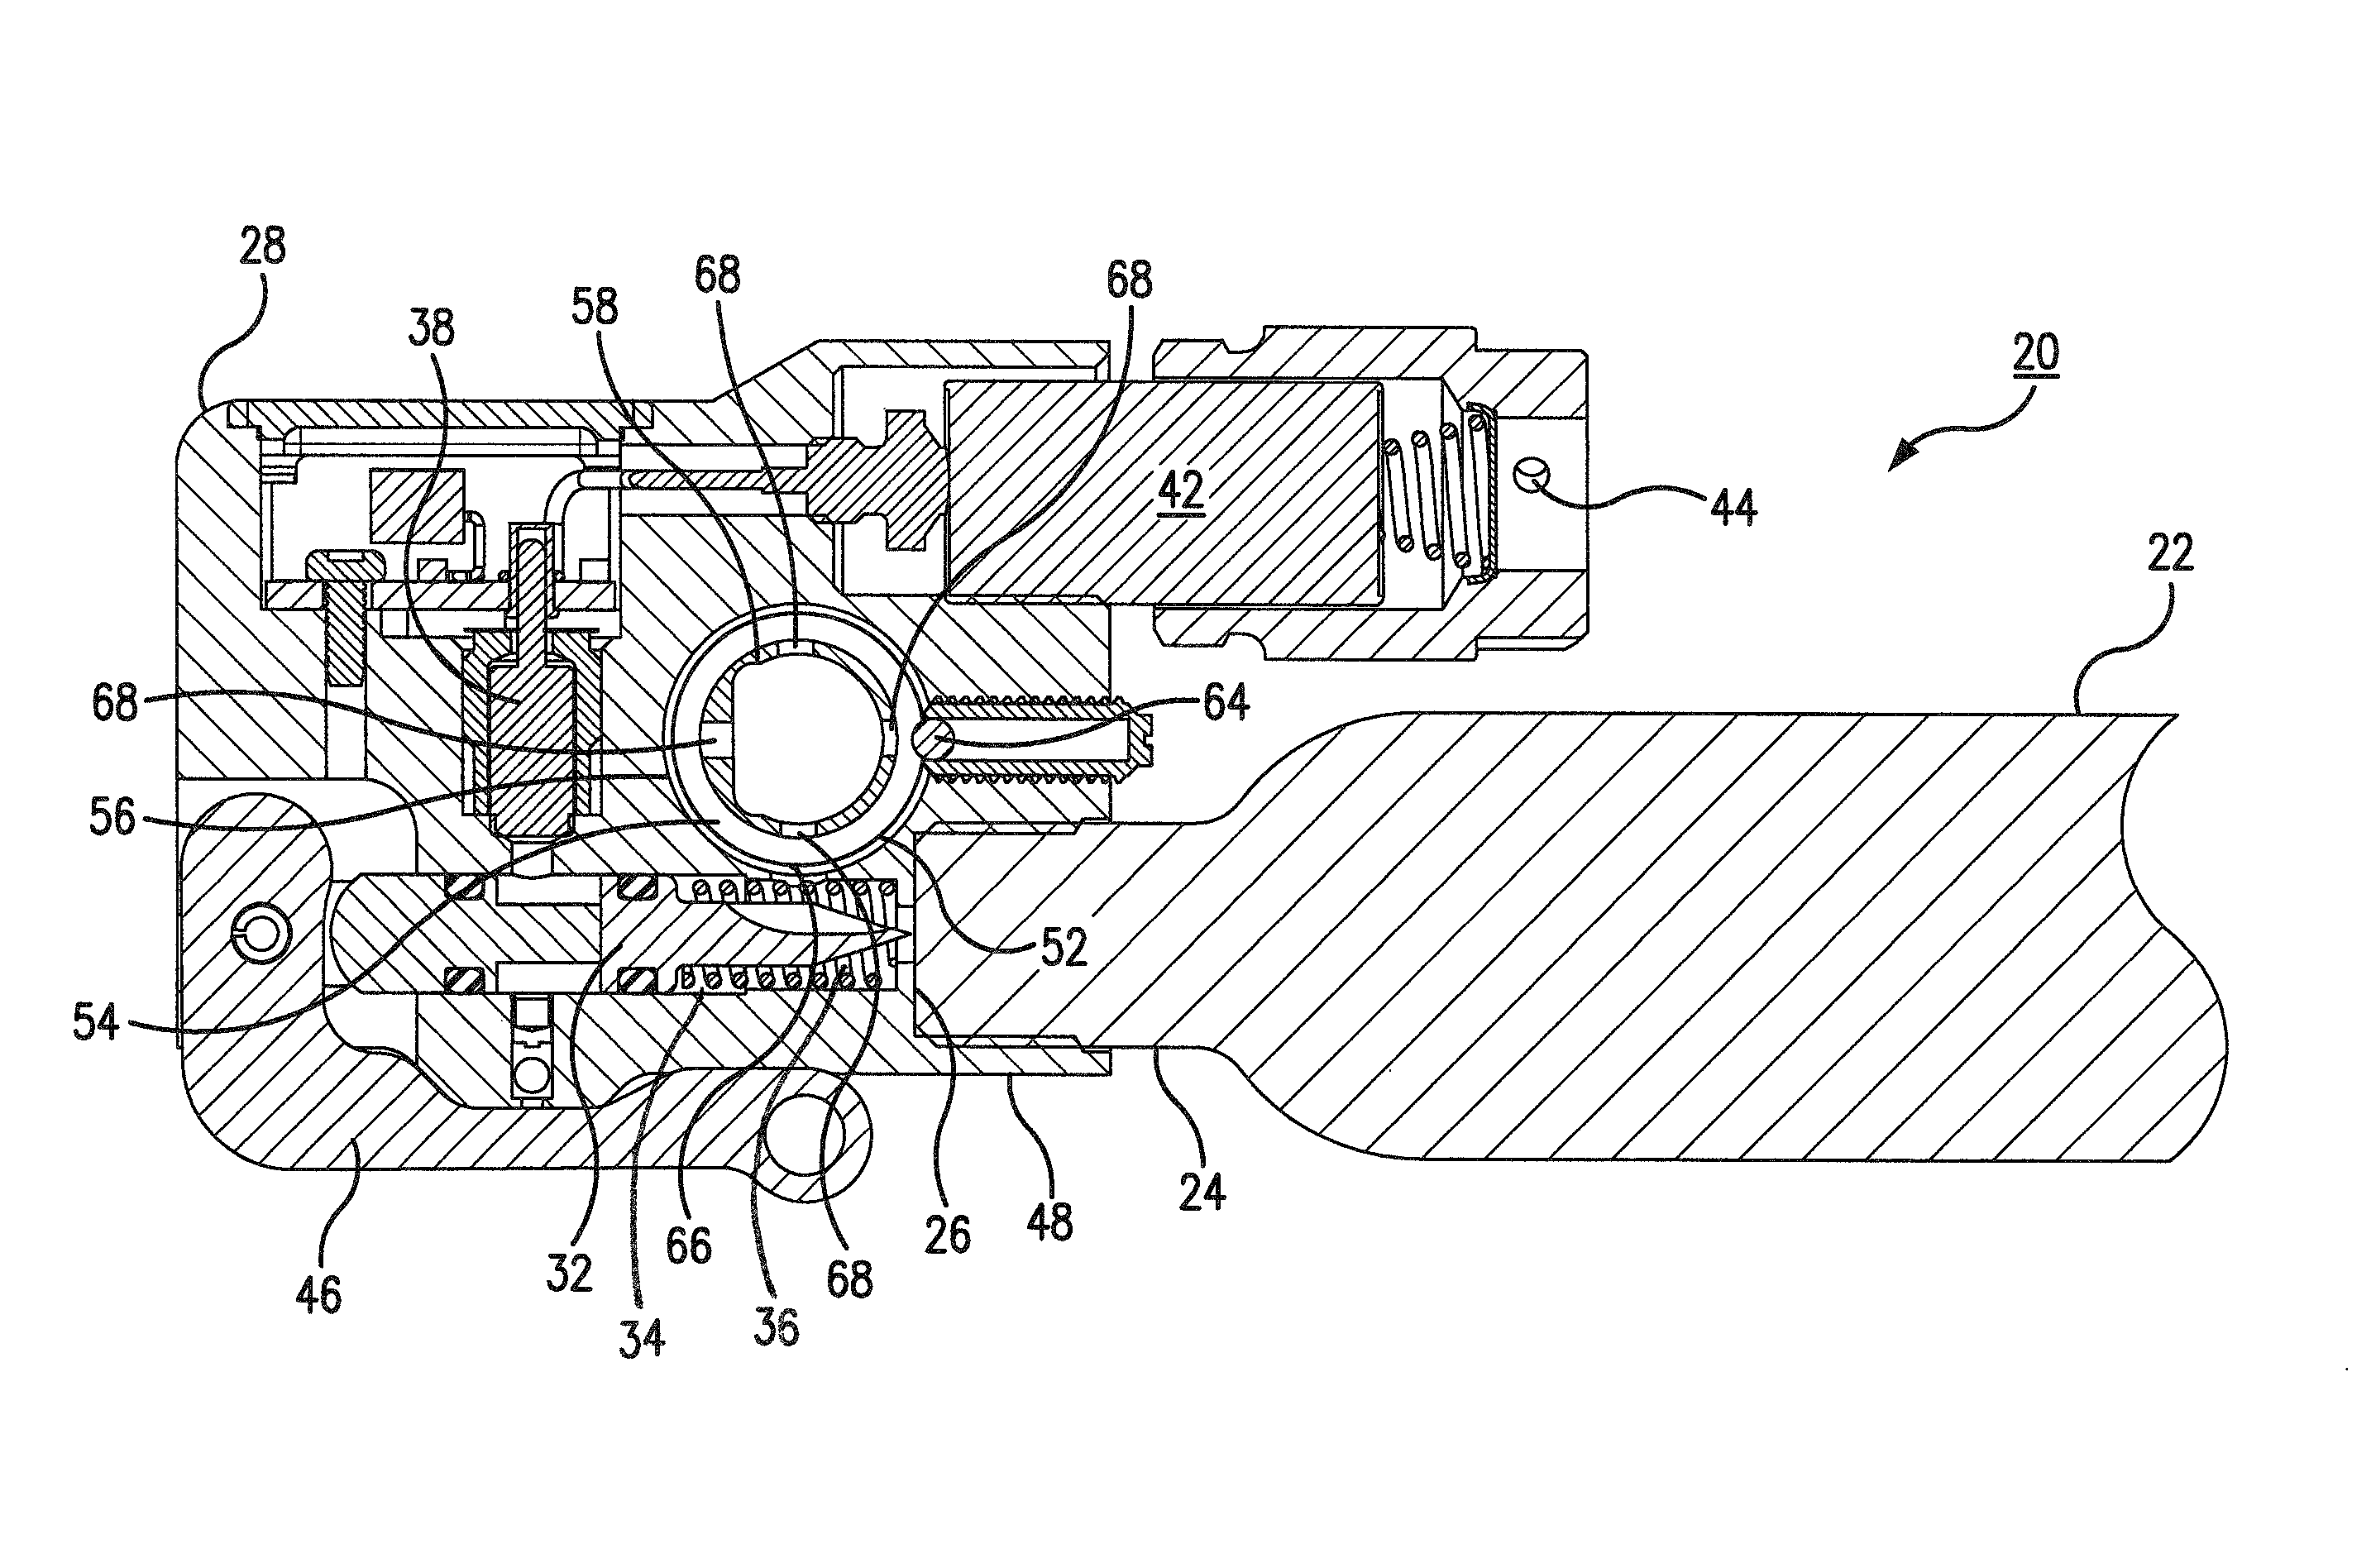 Water actuated pressurized gas release device